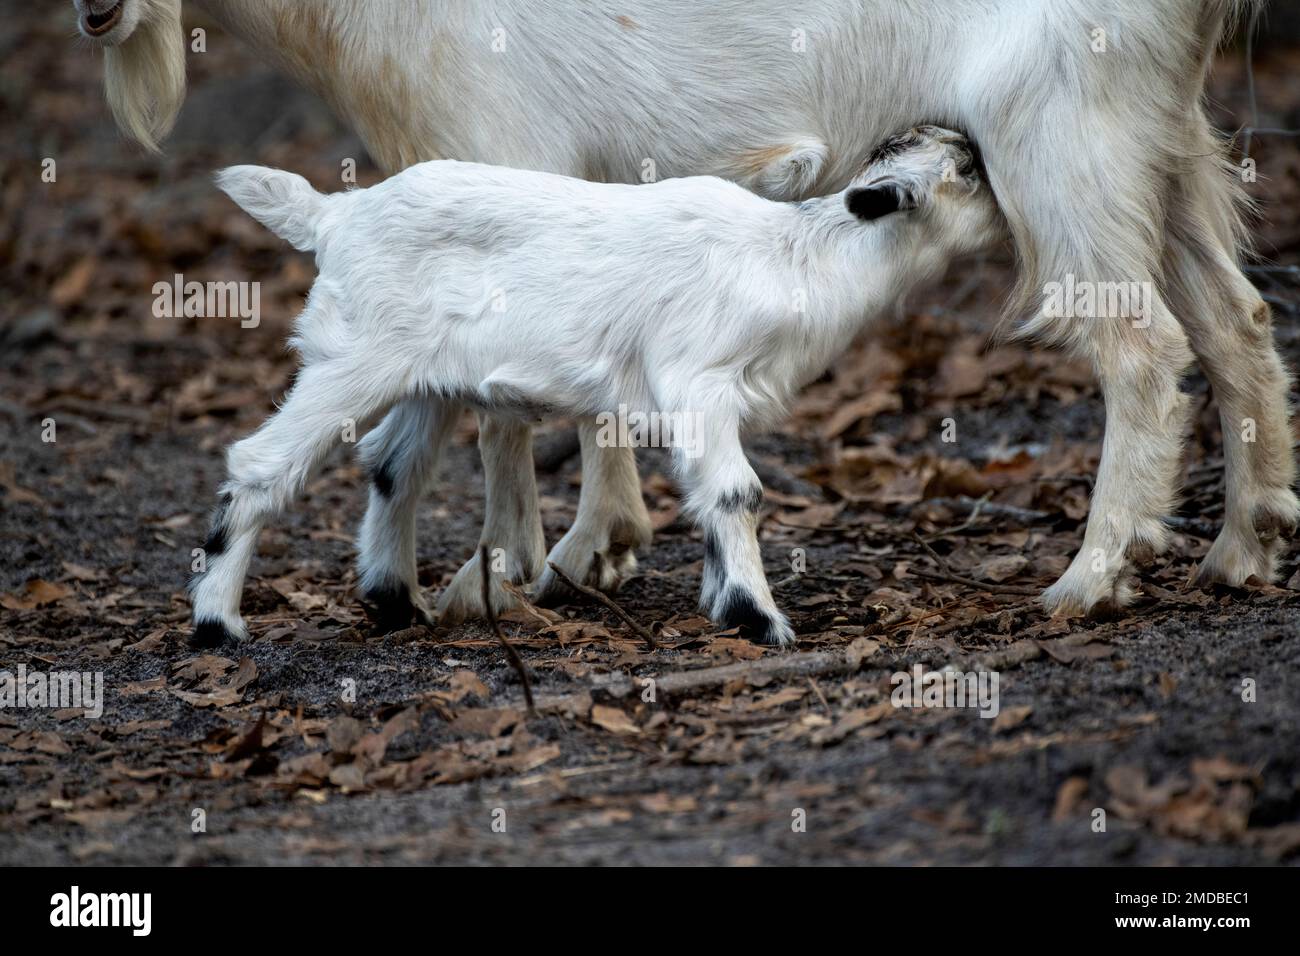 a small white baby goat nursing from its mother Stock Photo